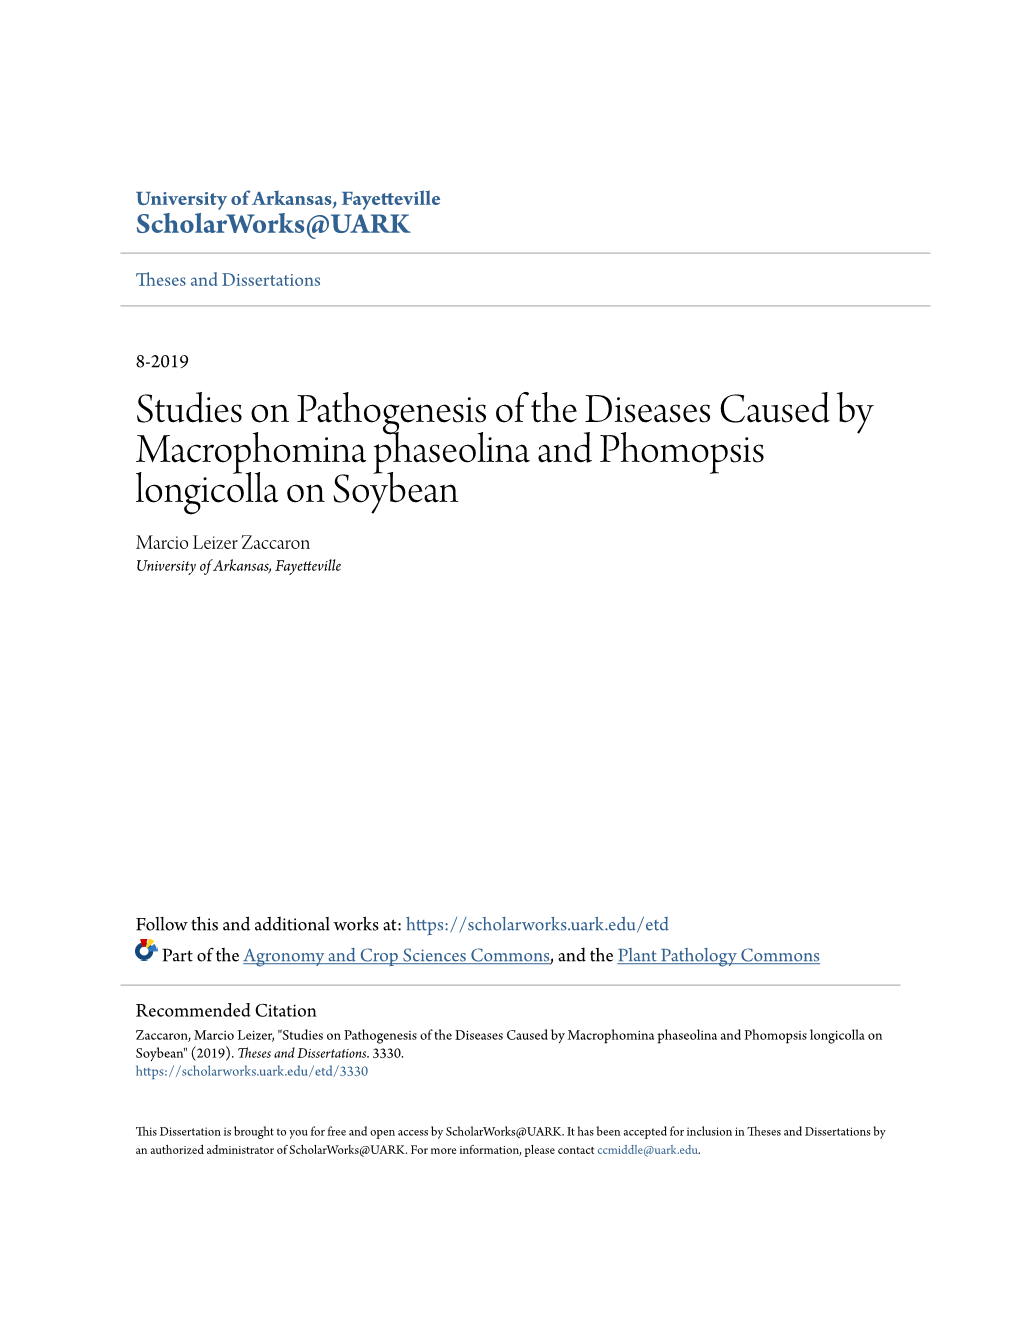 Studies on Pathogenesis of the Diseases Caused by Macrophomina Phaseolina and Phomopsis Longicolla on Soybean